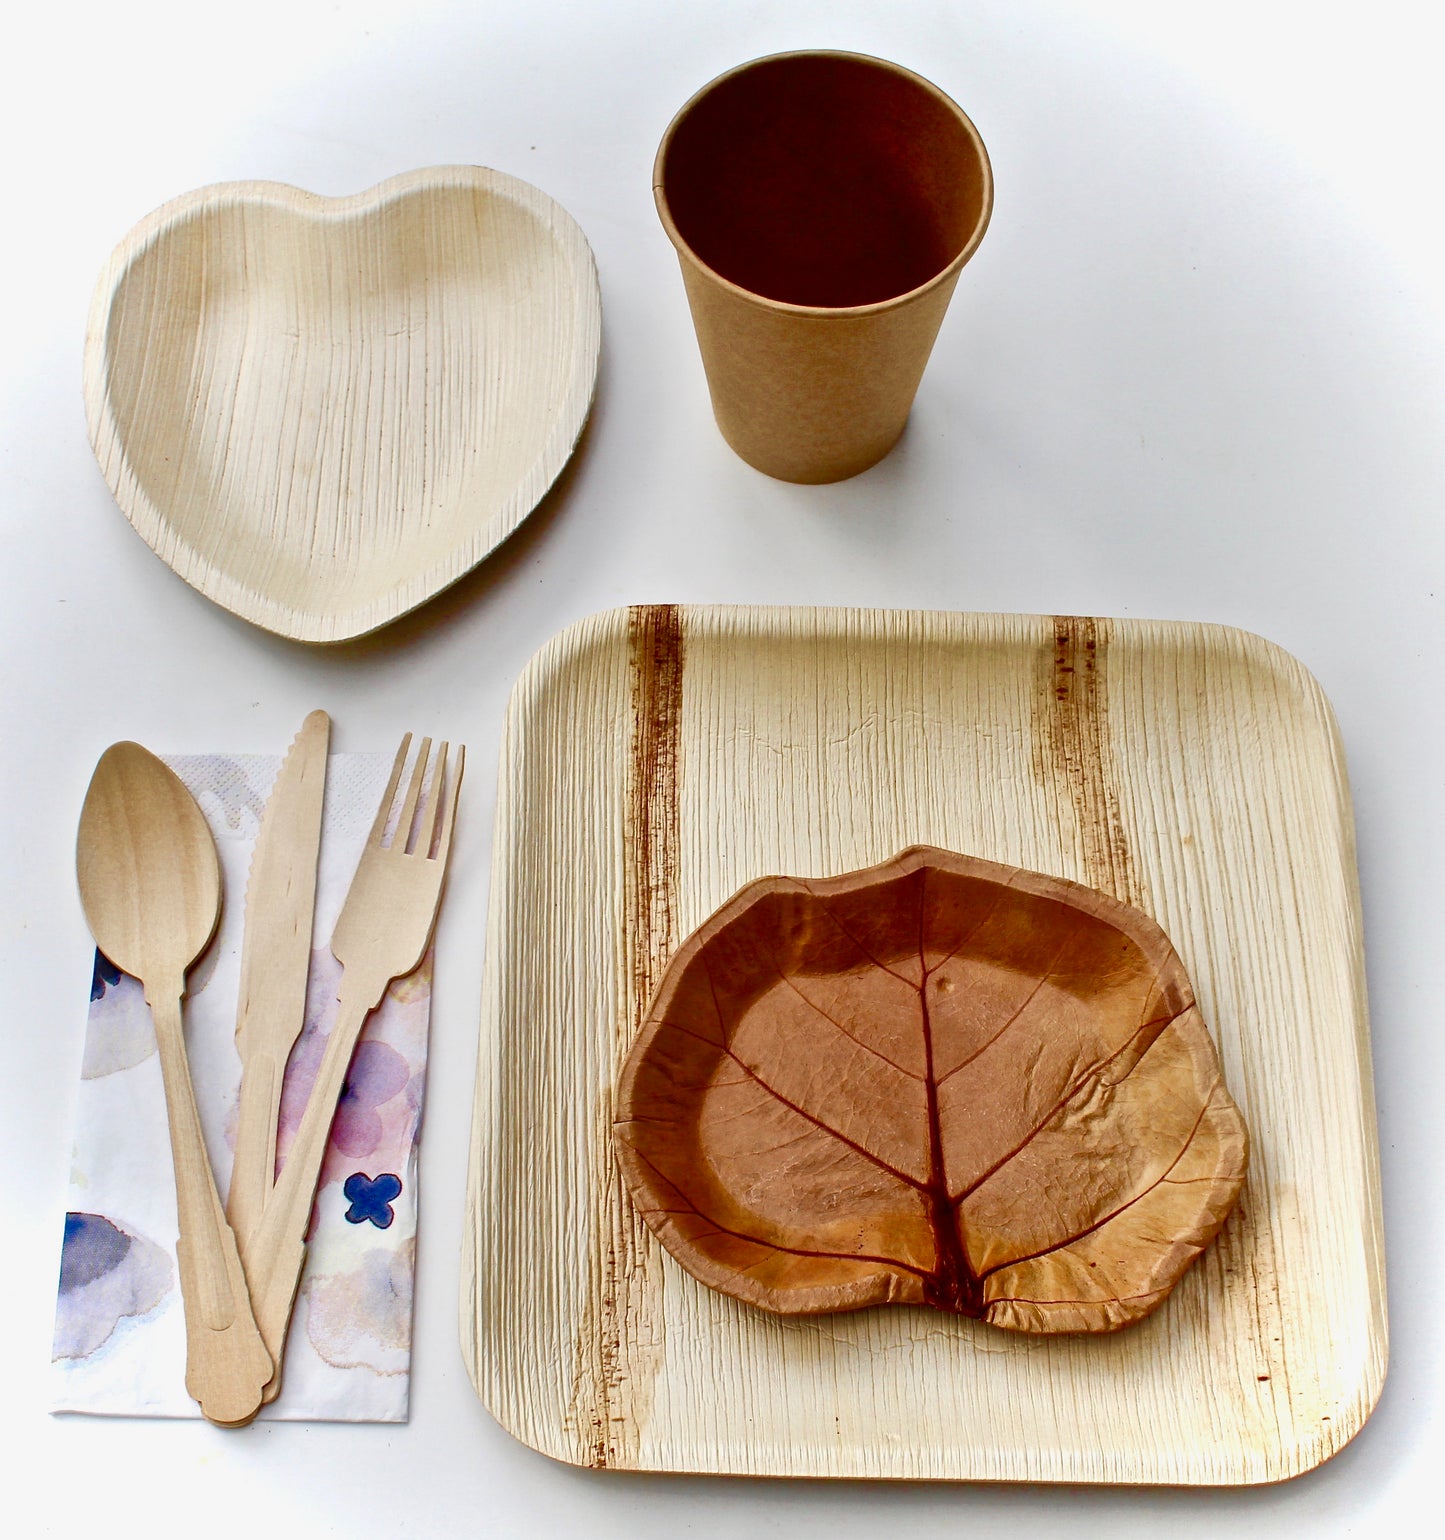 Bamboo Type Palm Leaf Plate 20 Pic 10" Deep Square - 20 Pic Sea grape 7" Dessert plate - 60 pic Utensils - 20 Pic Heart ^" - 20 Pic cup - 20 pic Napkin